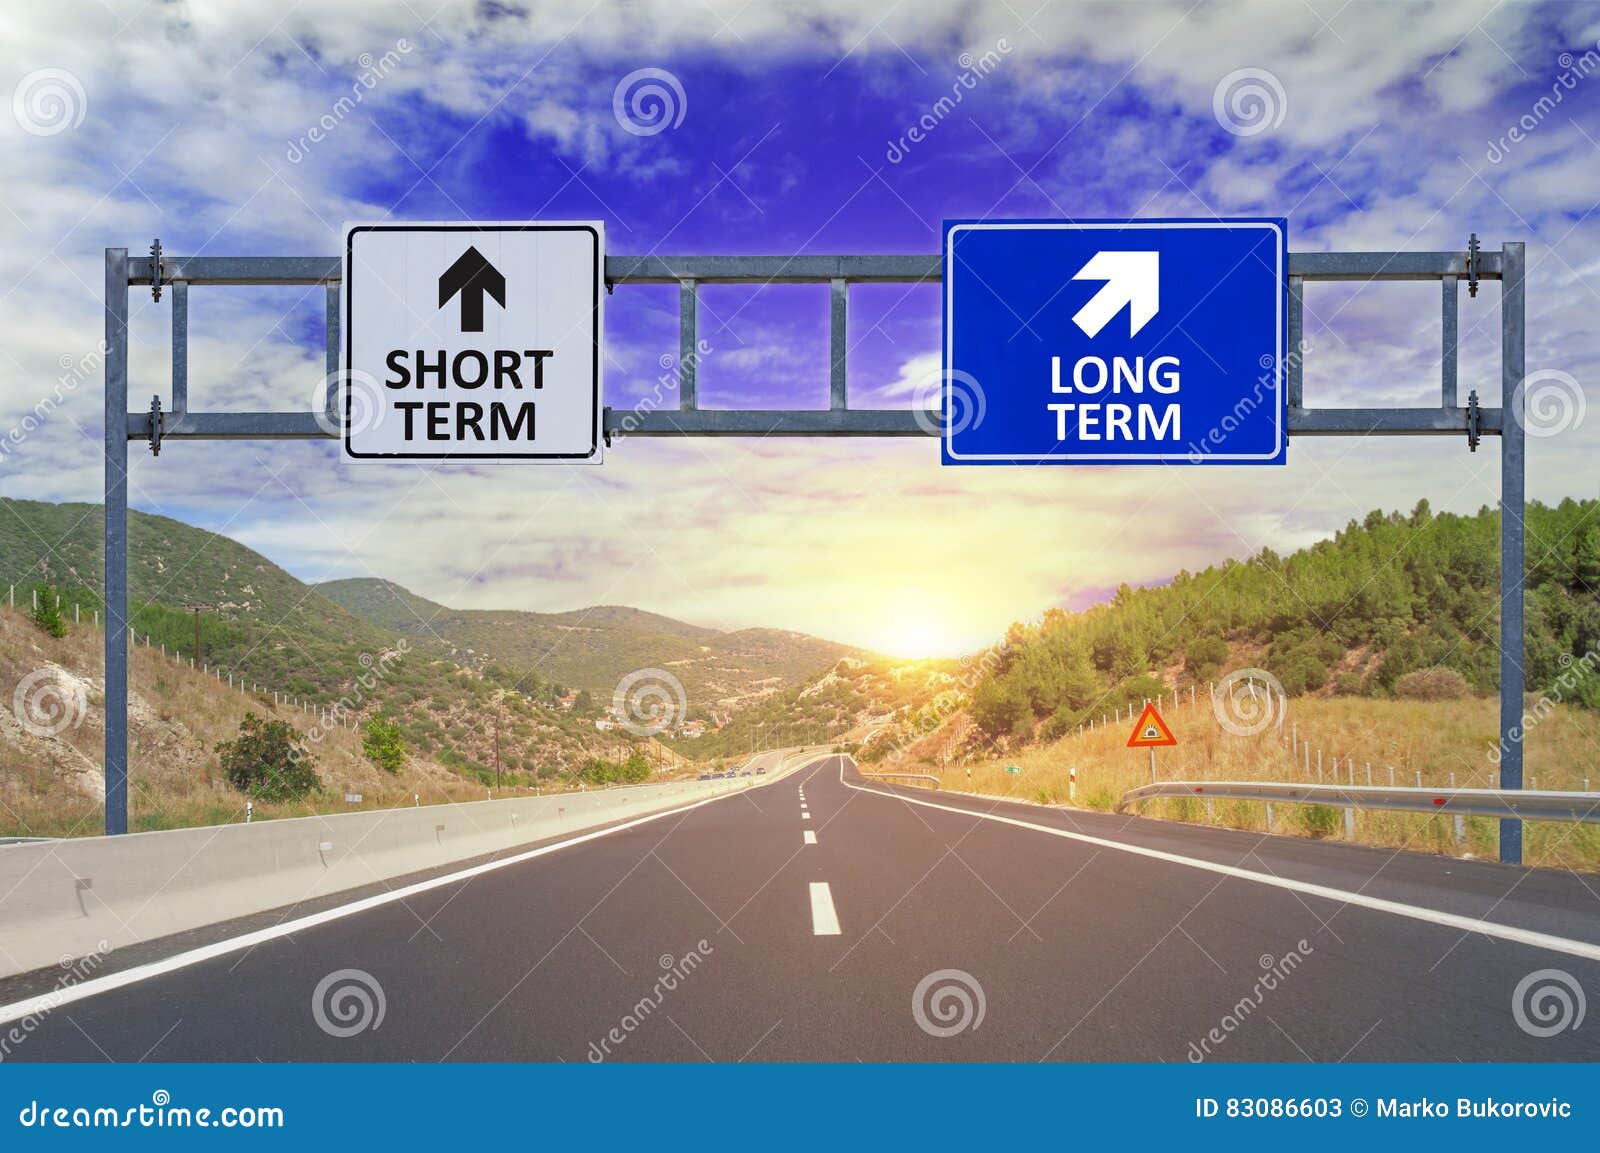 two options short term and long term on road signs on highway